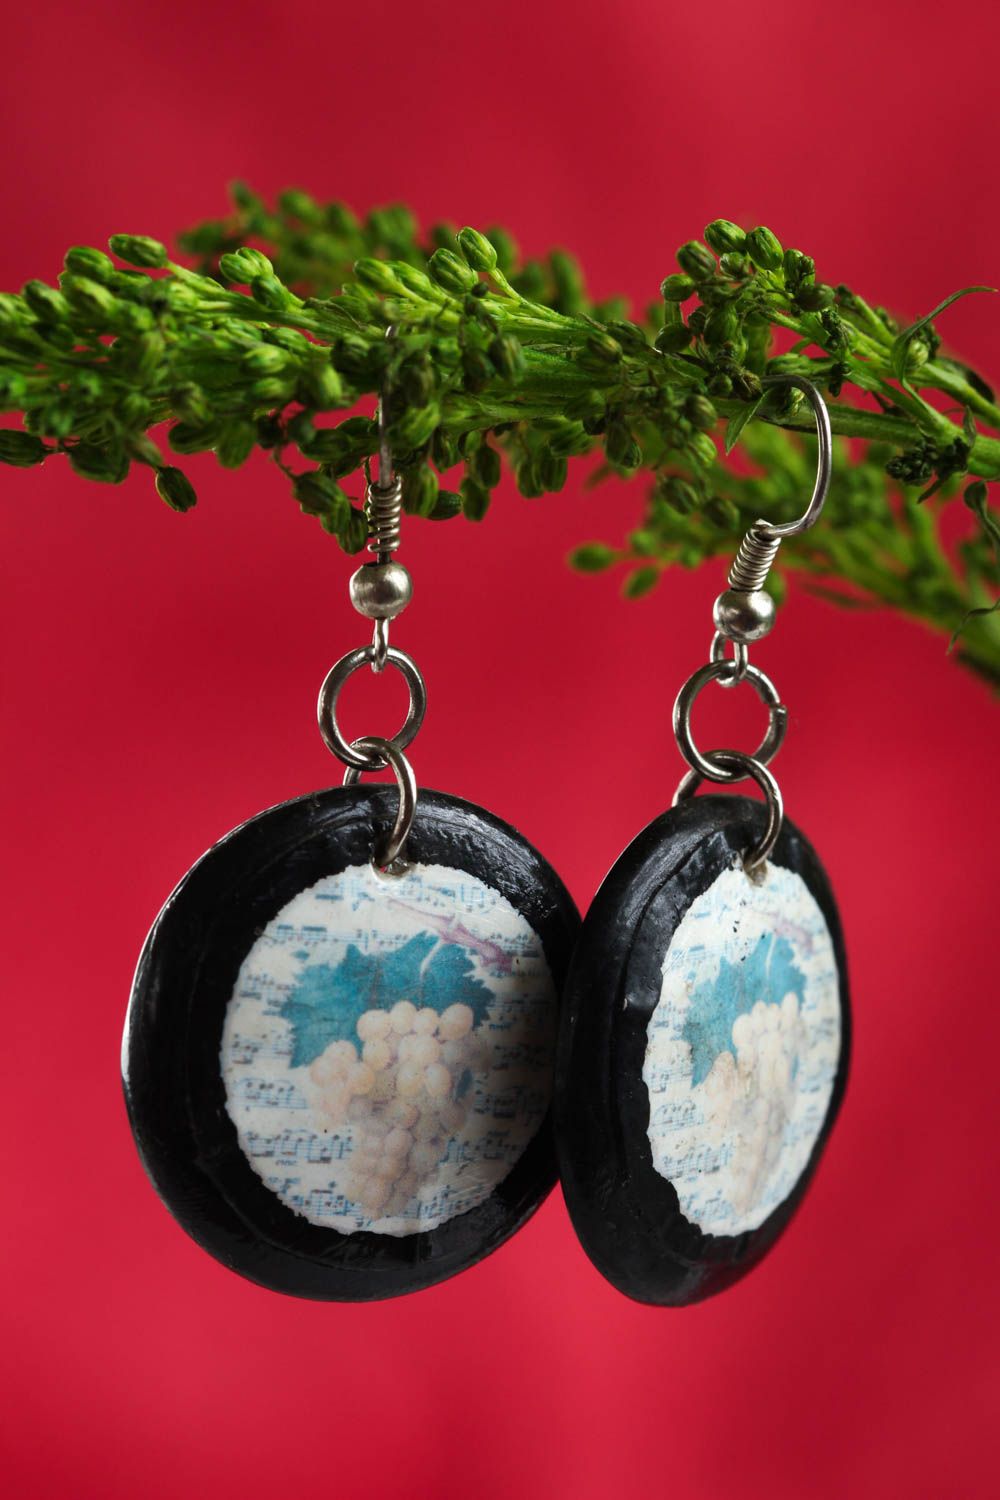 Unusual handmade plastic earrings cool jewelry designs best gifts for her photo 1